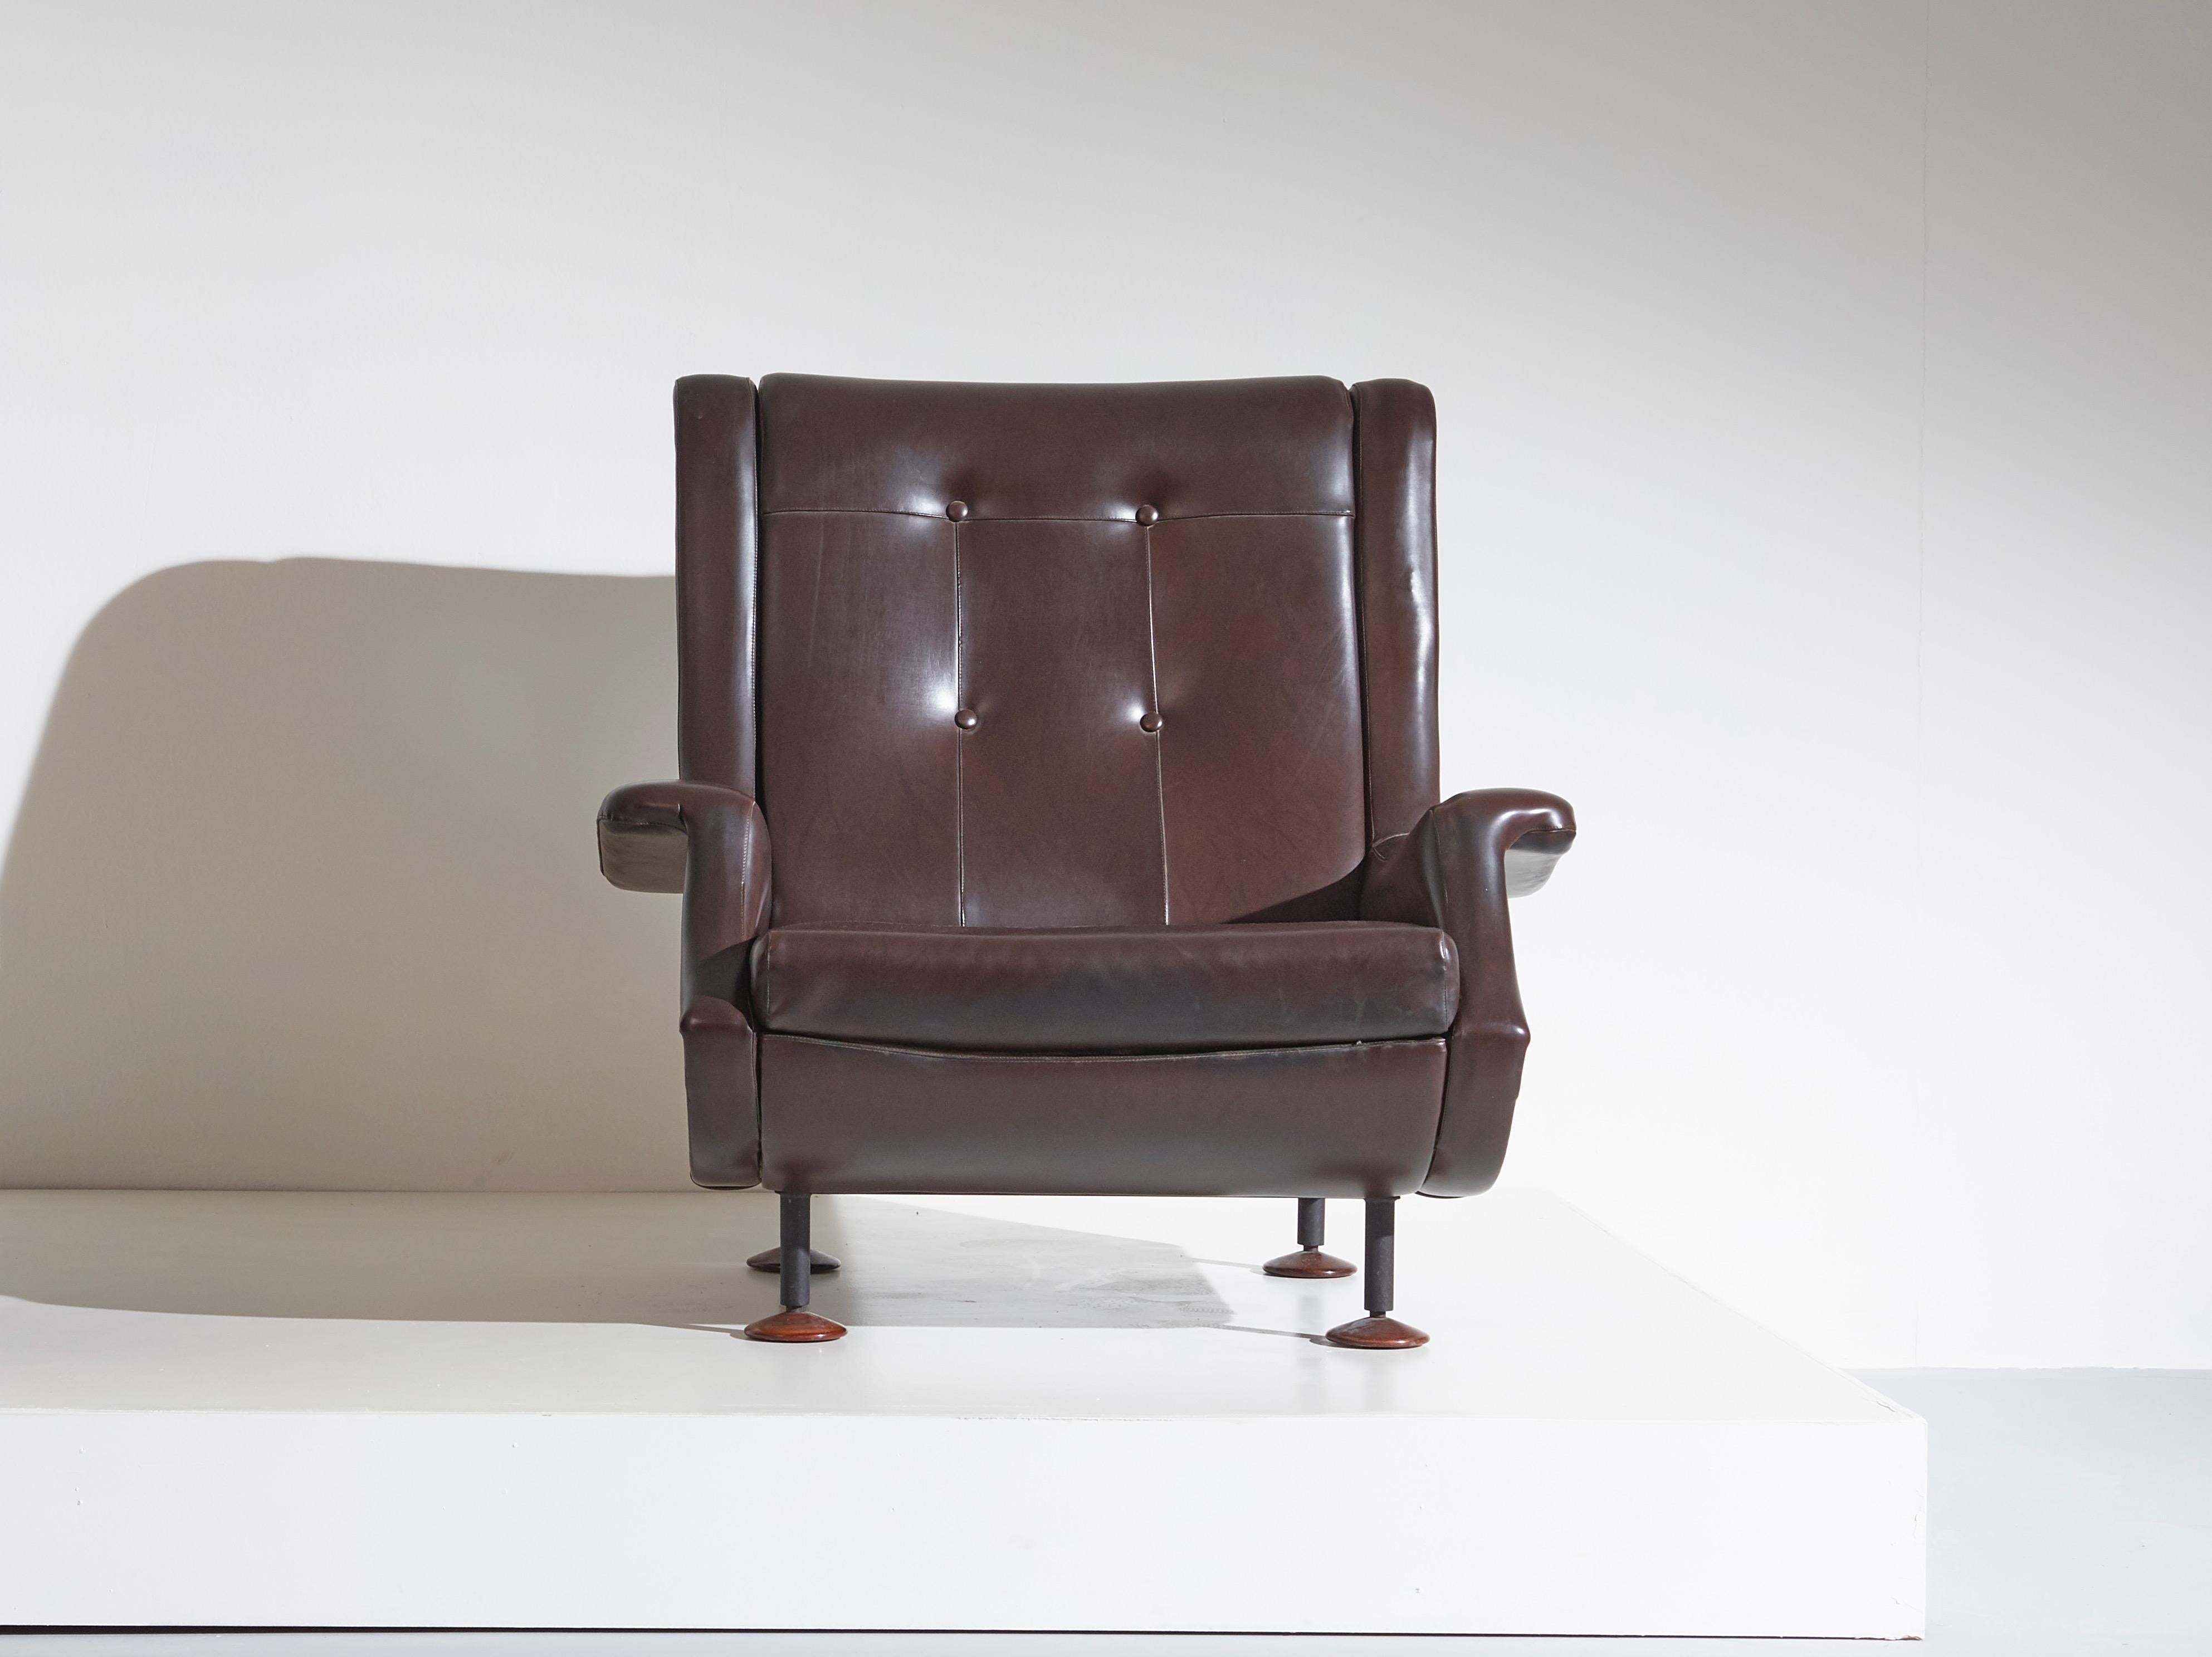 A regent armchair with black lacquered metal legs and walnut disk feet. Designed by Marco Zanuso for Arflex. 

Dimensions: 79 x 83 x 81 cm [DxWxH]

Condition: Some stains and abrasions on their leather. Overall good vintage